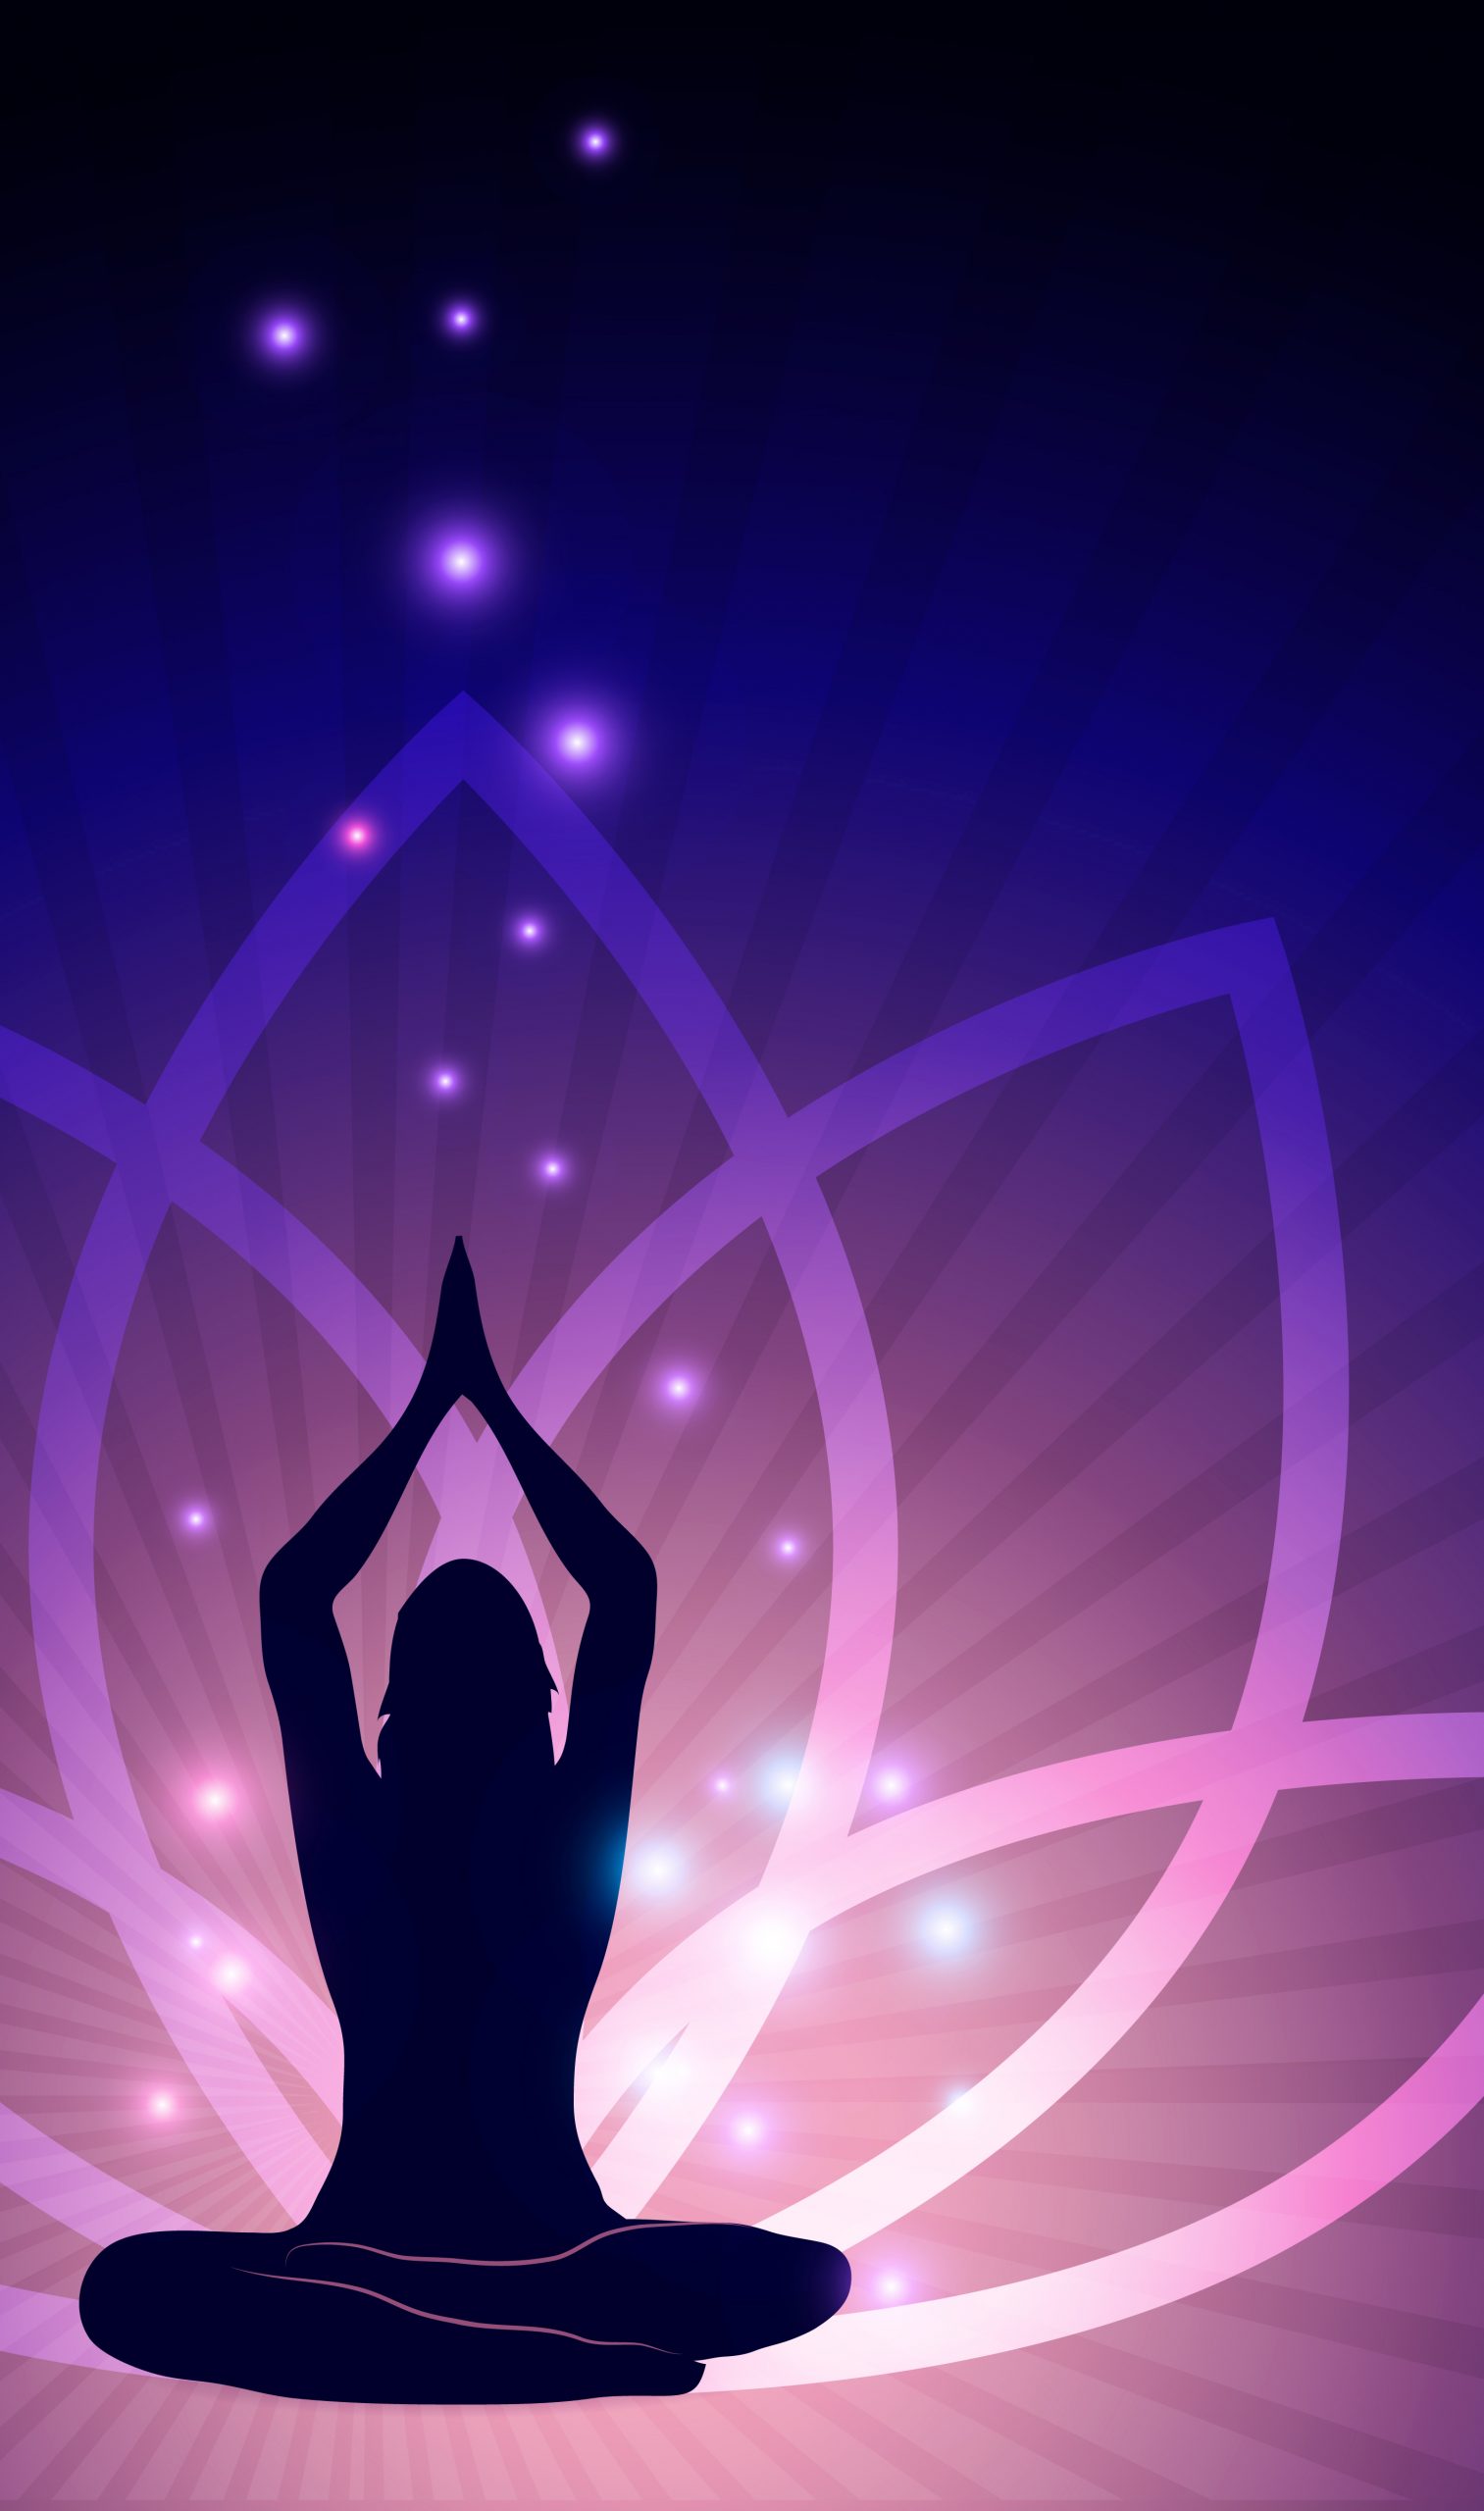 https://www.meditationinsydney.com/wp-content/uploads/2019/12/Guided-Chakra-balancing-and-Cleansing-meditation-for-healing-scaled.jpg